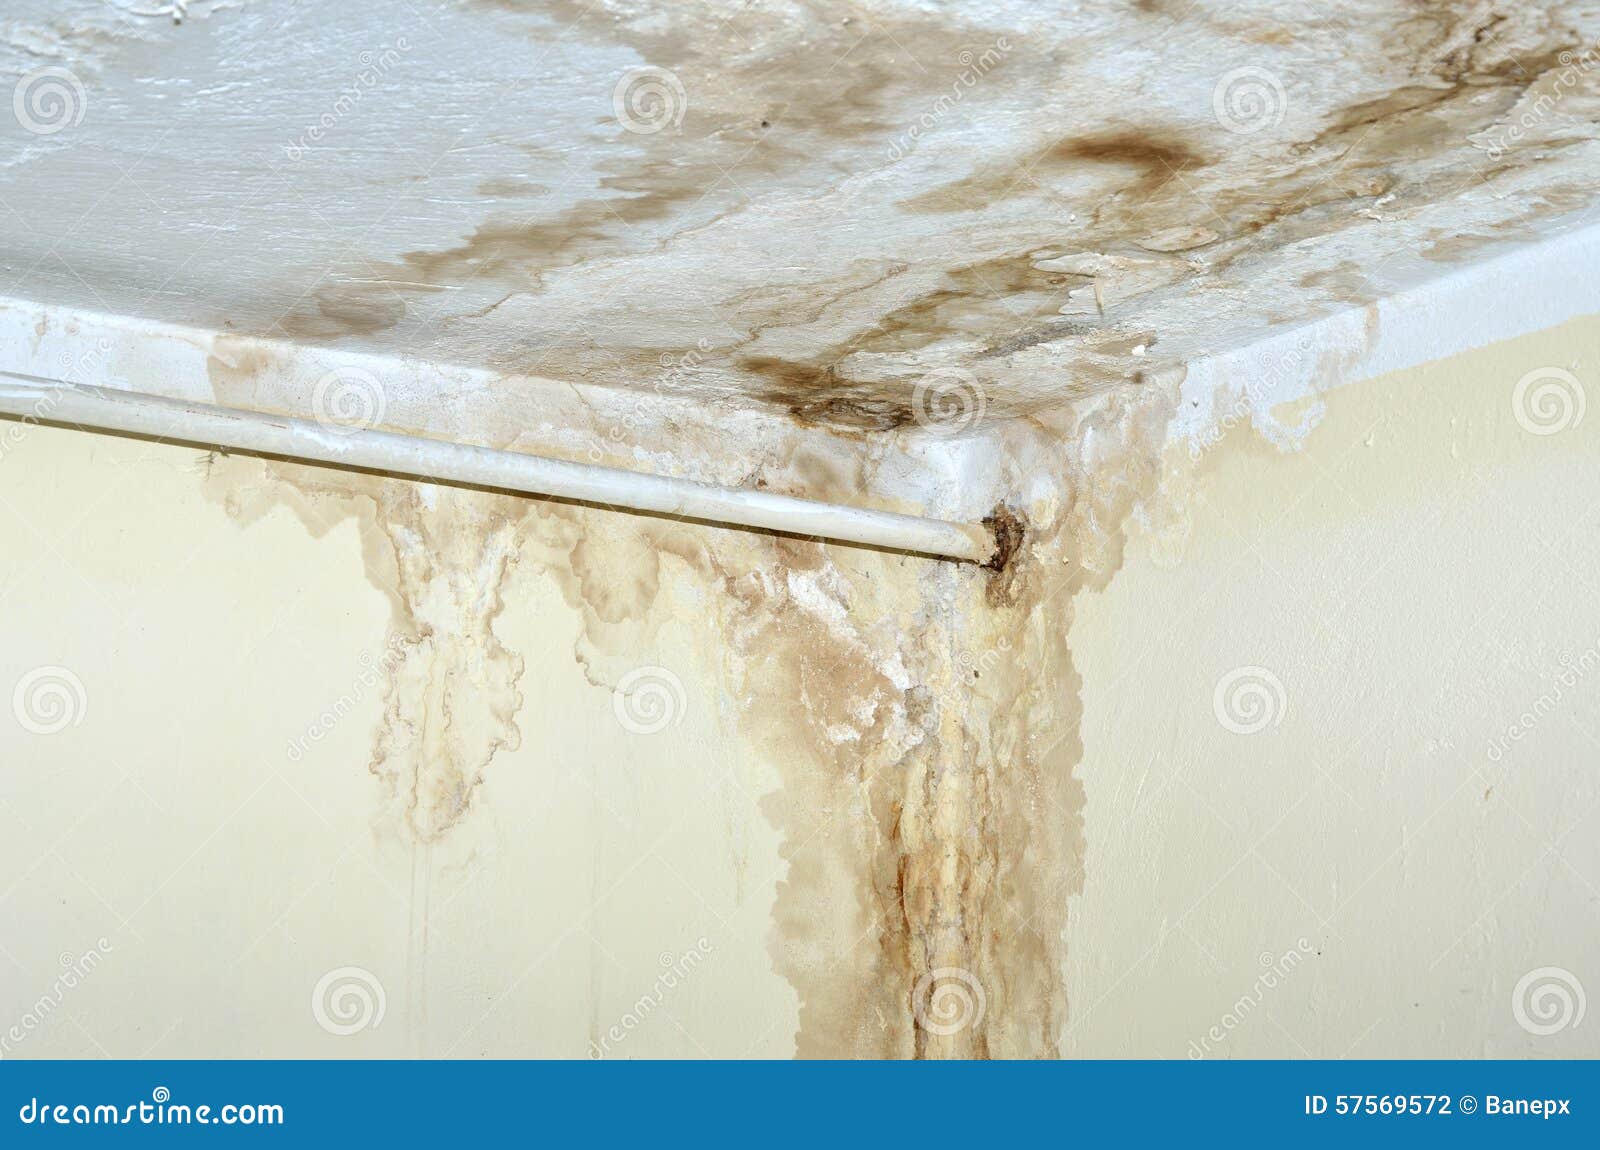 Mold On The Ceiling And Rusty Pipe On The Wall Stock Photo Image